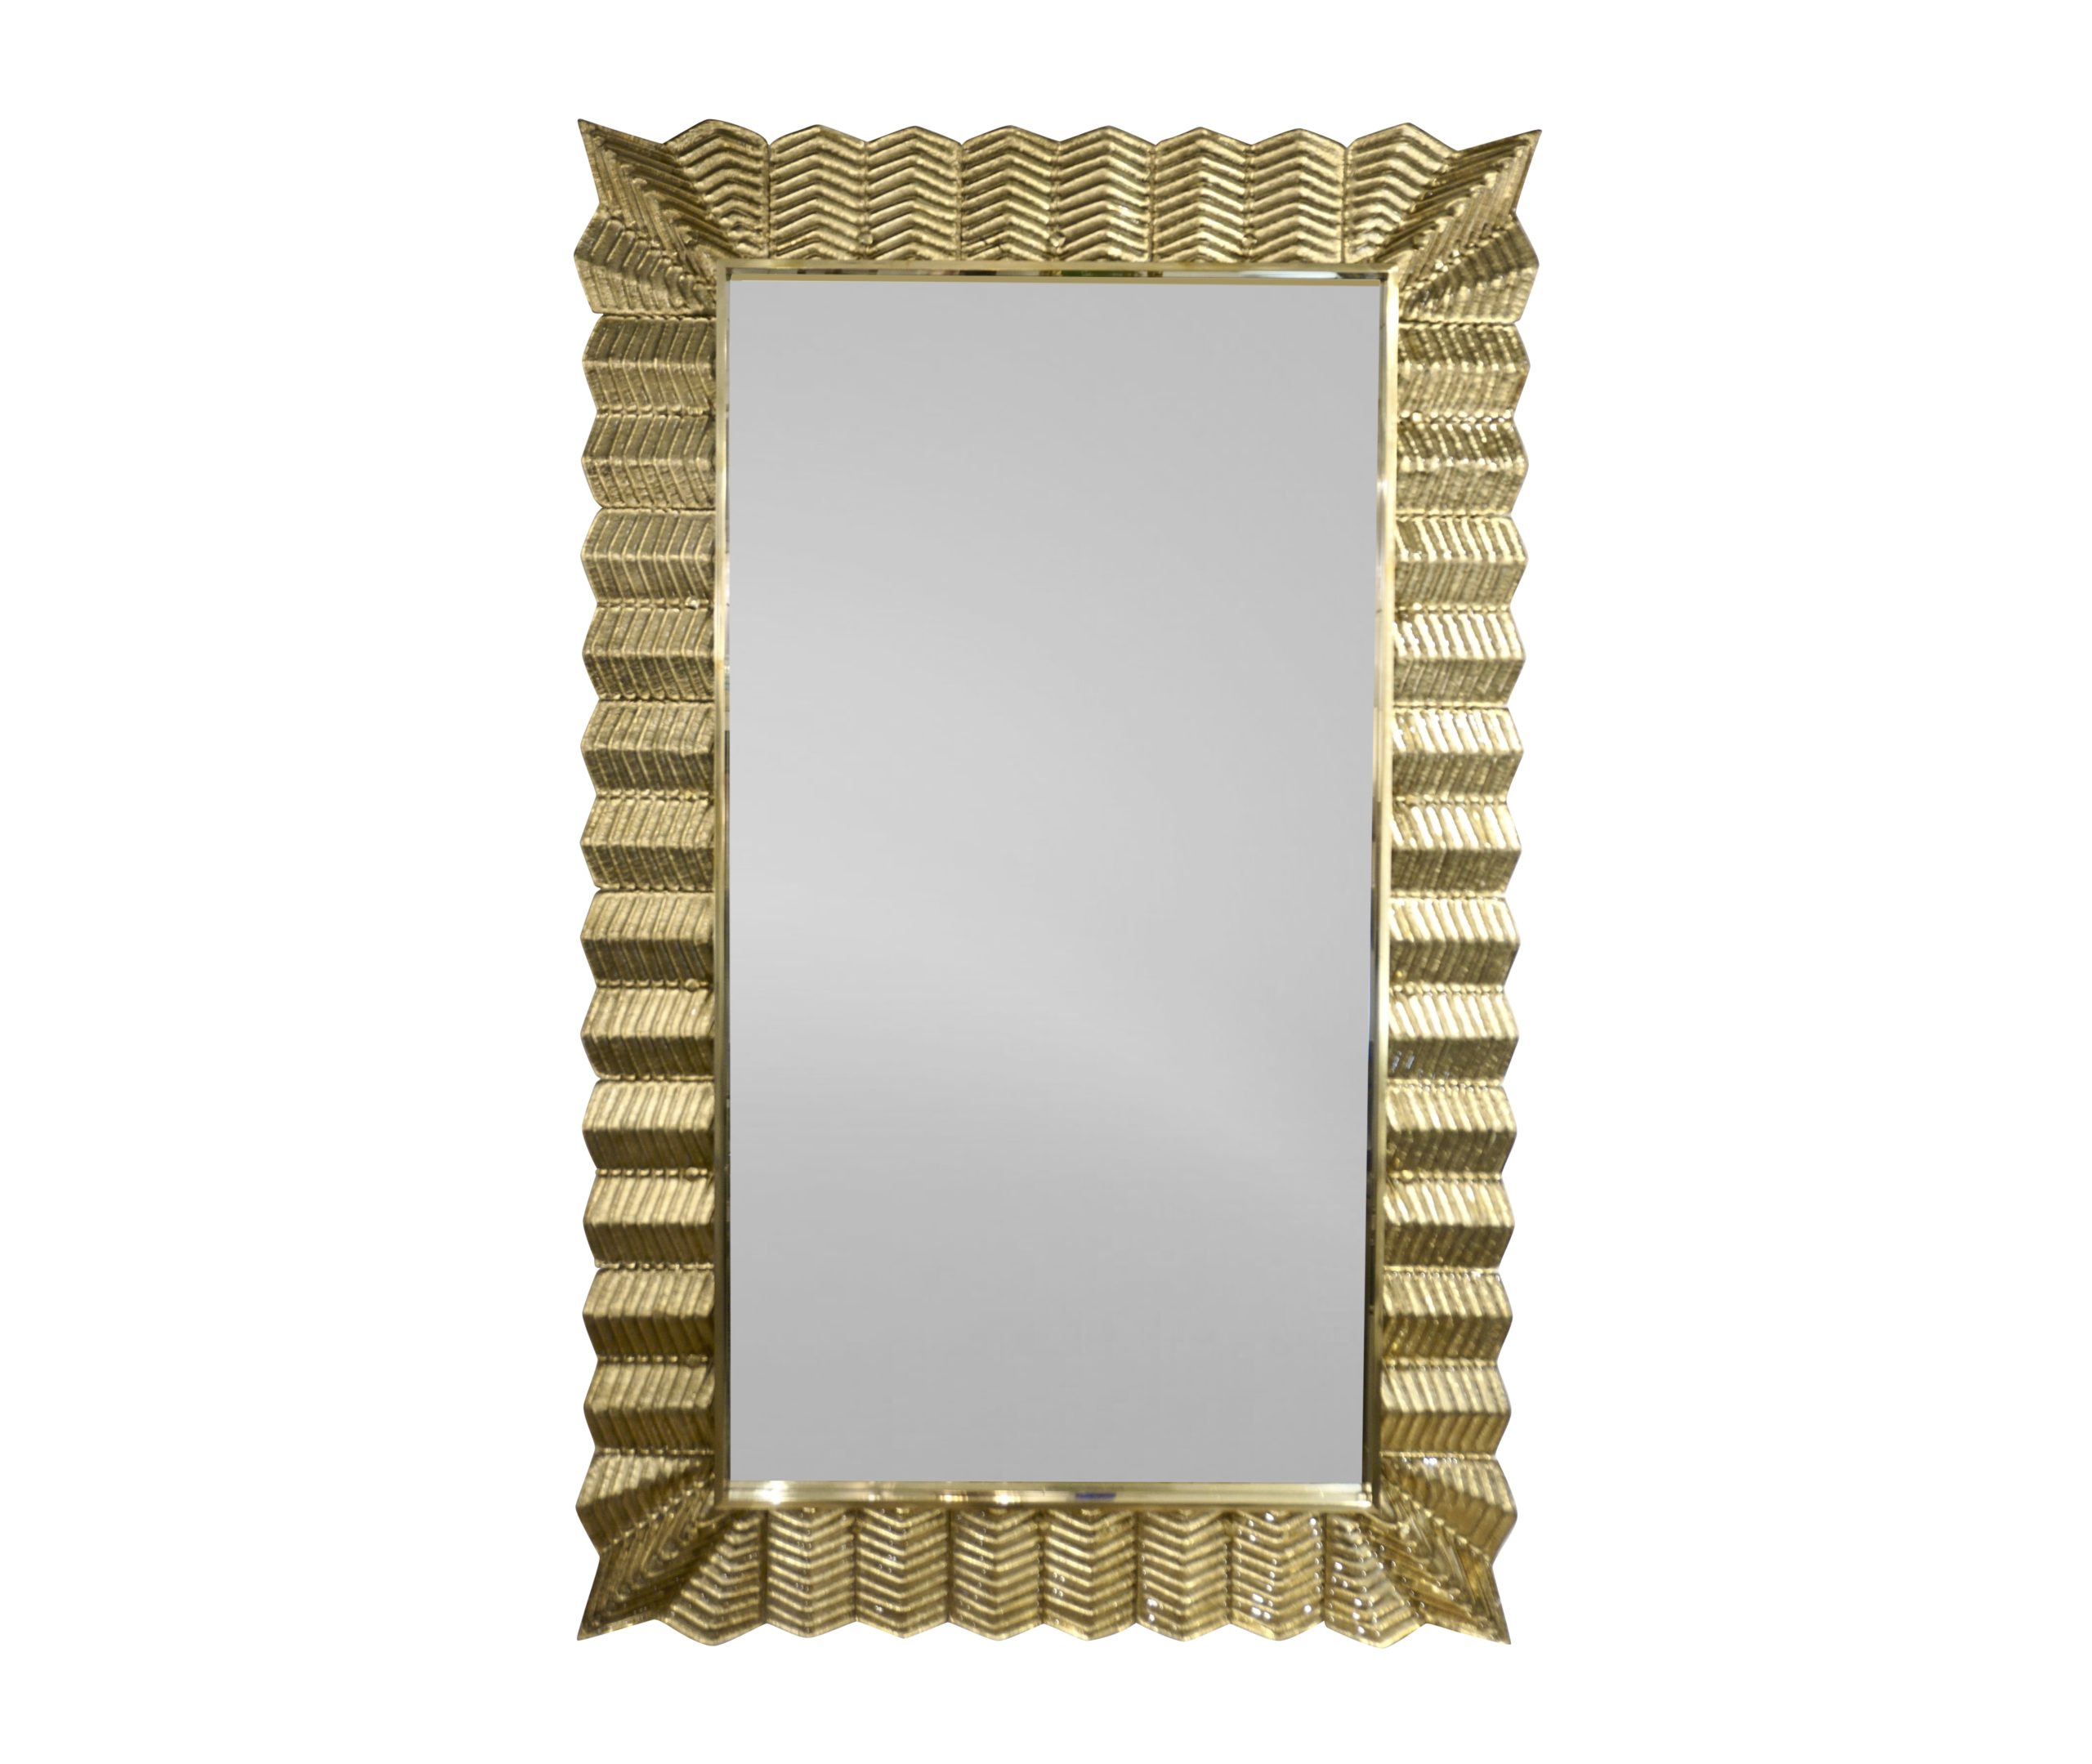 cosulich_interiors_and_antiques_products_new_york_design_Bespoke-Italian-Art-Deco-Design-Ruffled-Gold-Murano-Glass-Brass-Mirror_main-scaled-1